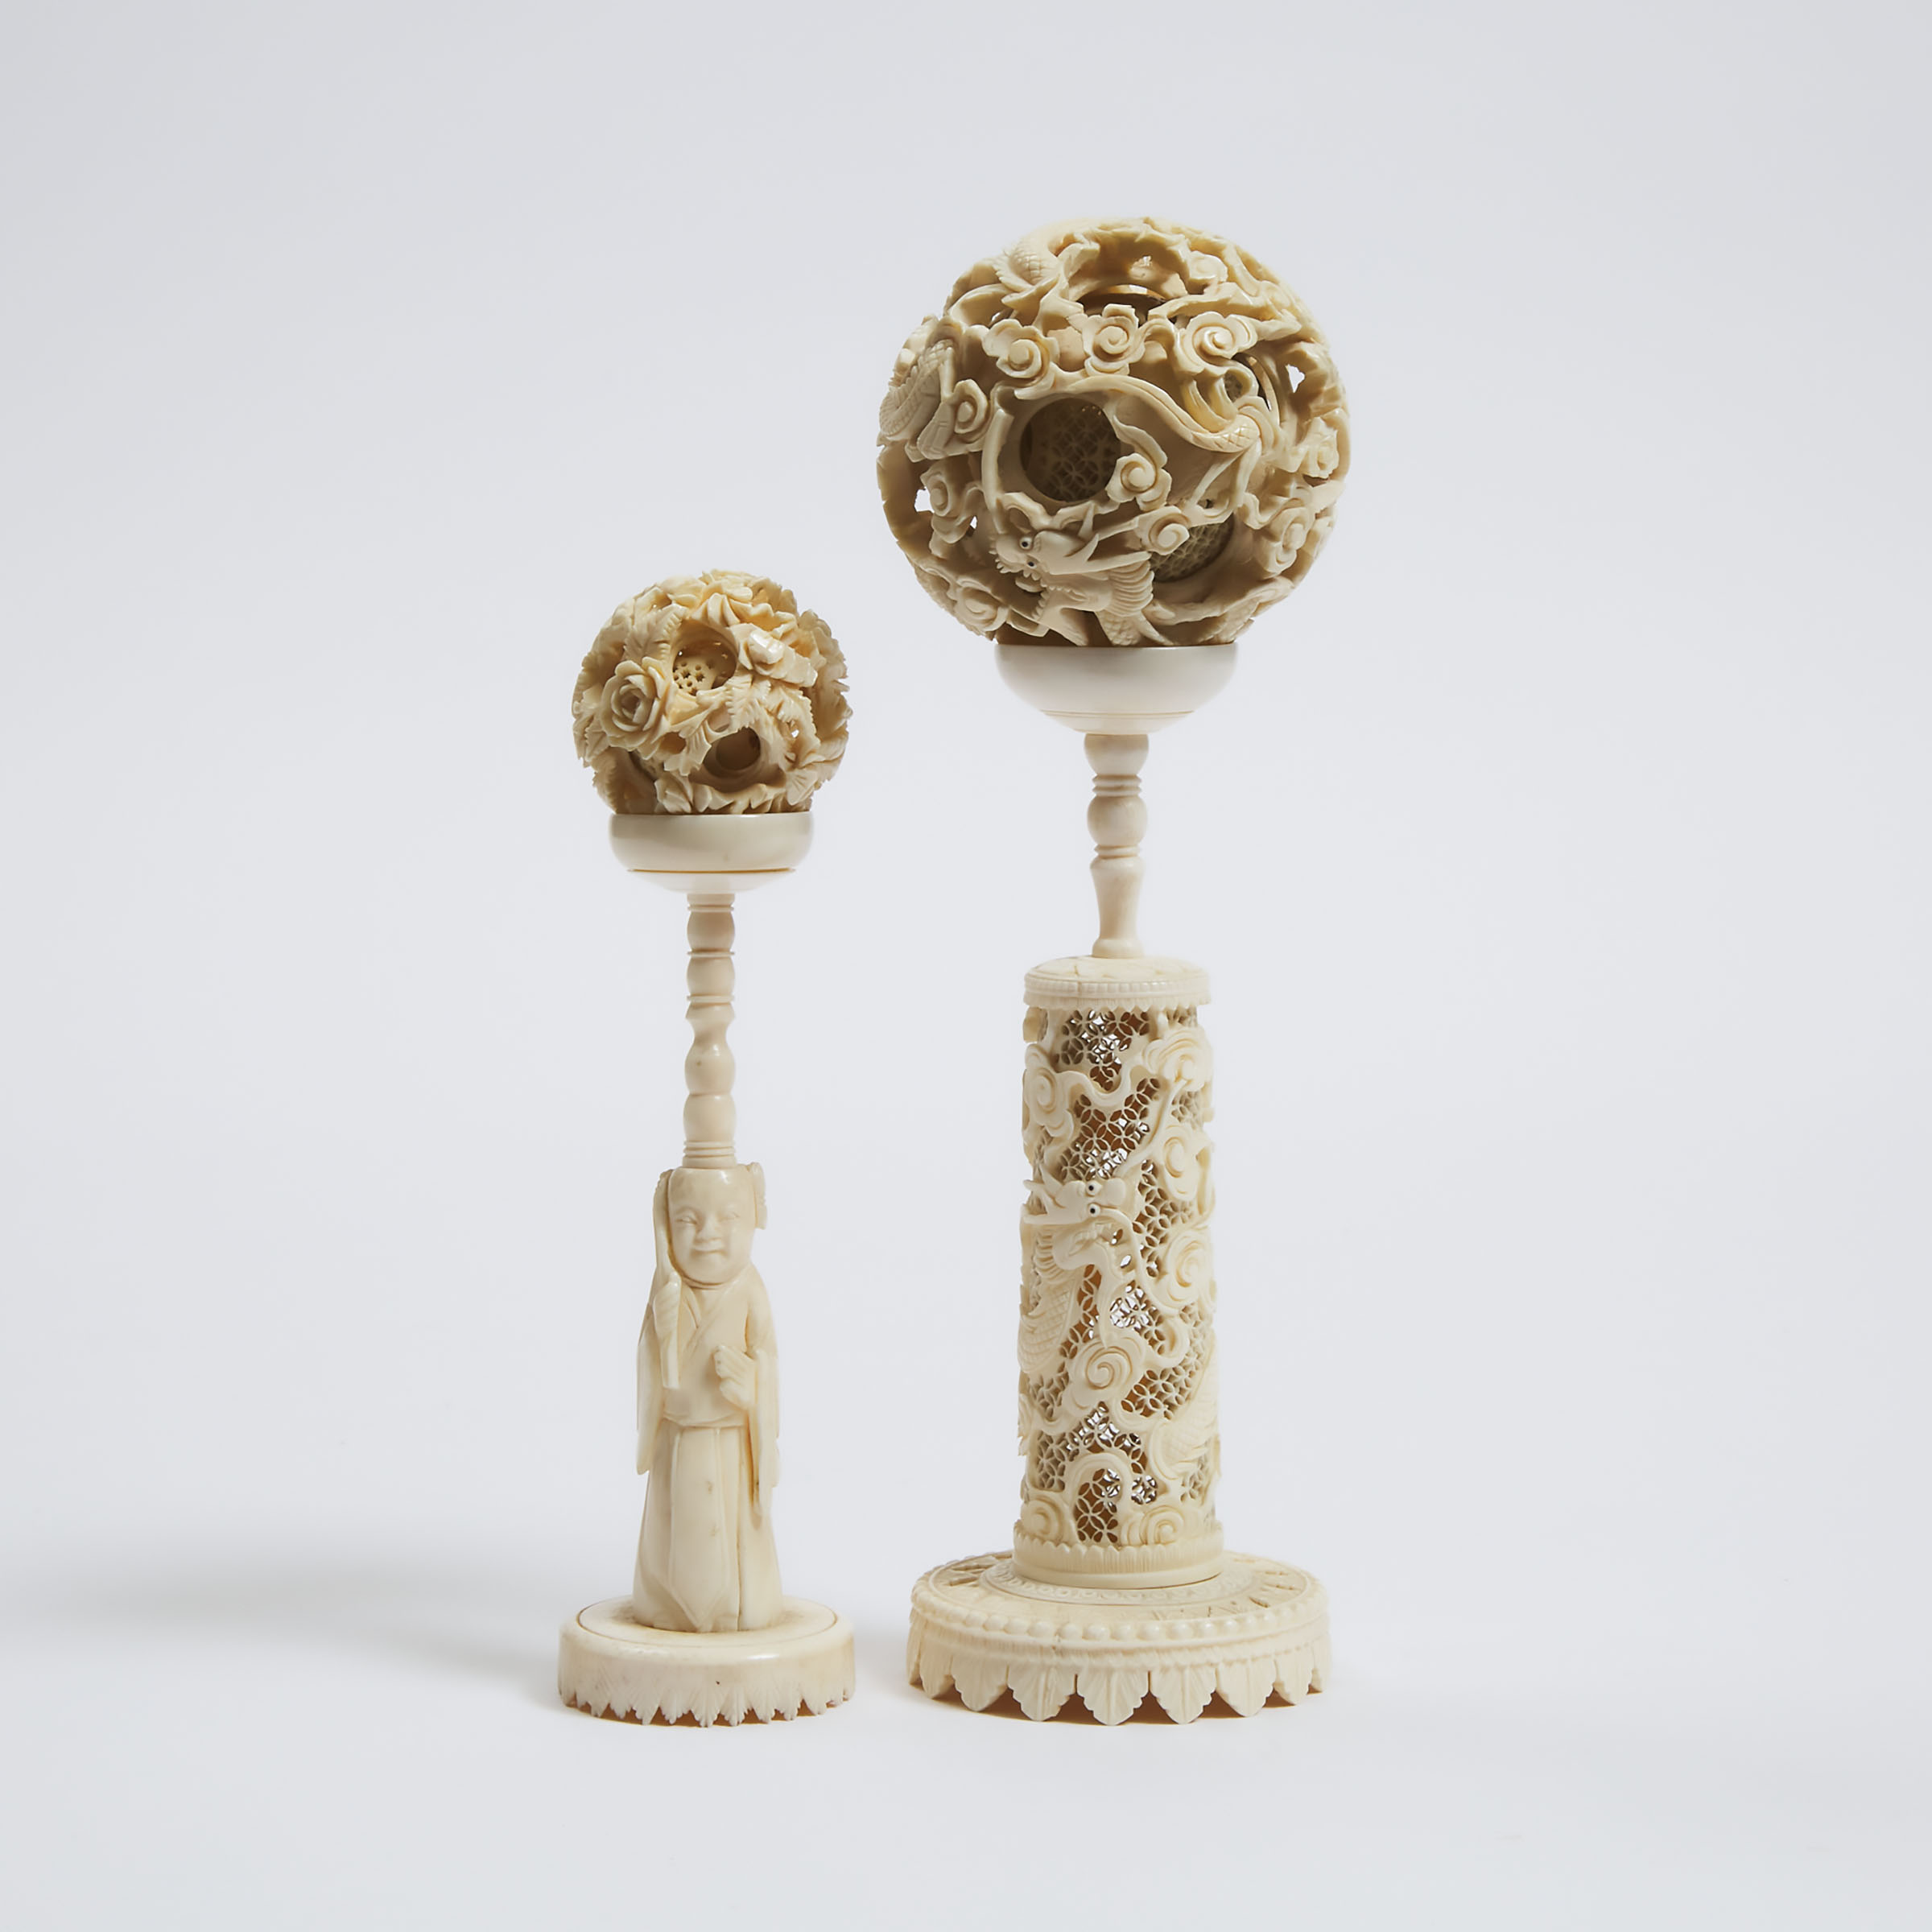 Two Chinese Ivory Puzzle Balls, Early to Mid 20th Century